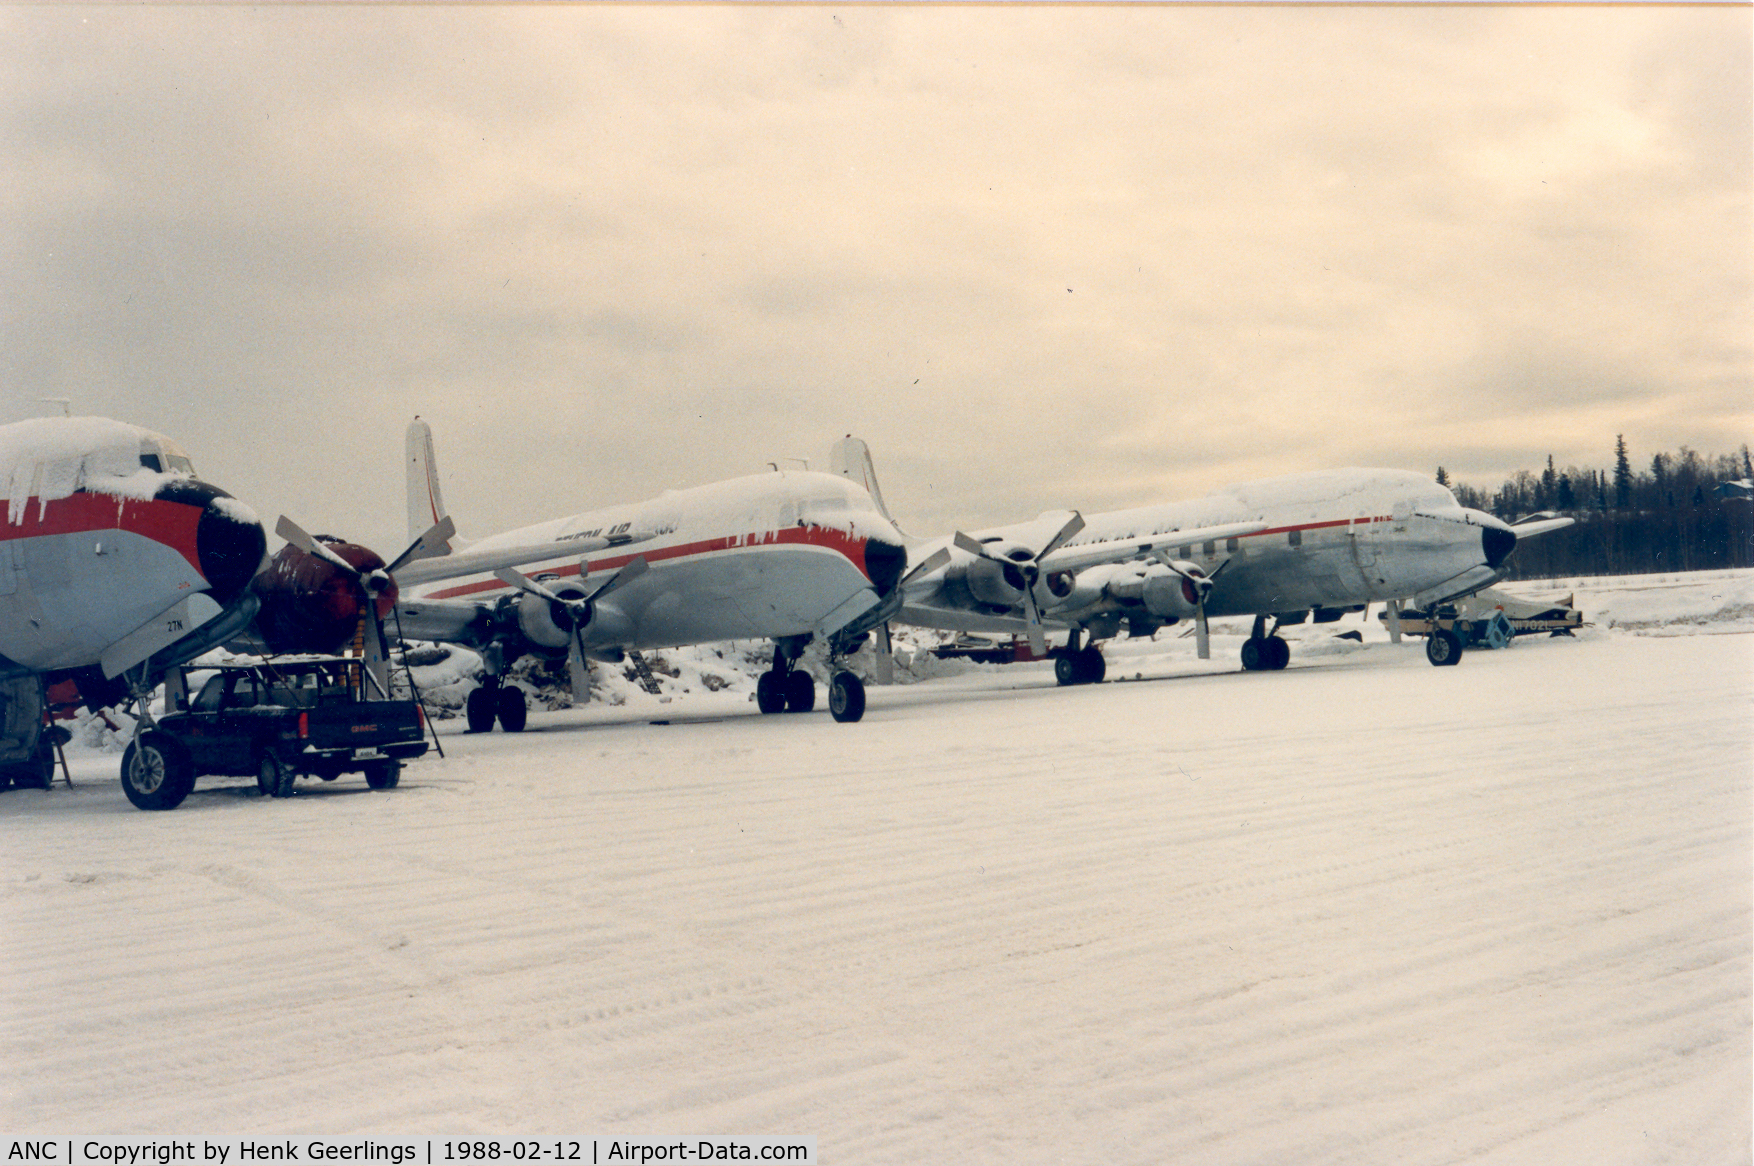 Ted Stevens Anchorage International Airport (ANC) -  Northern Air Cargo tarmac at Anchorage.

DC-6 fleet on a icy apron , winter 1988